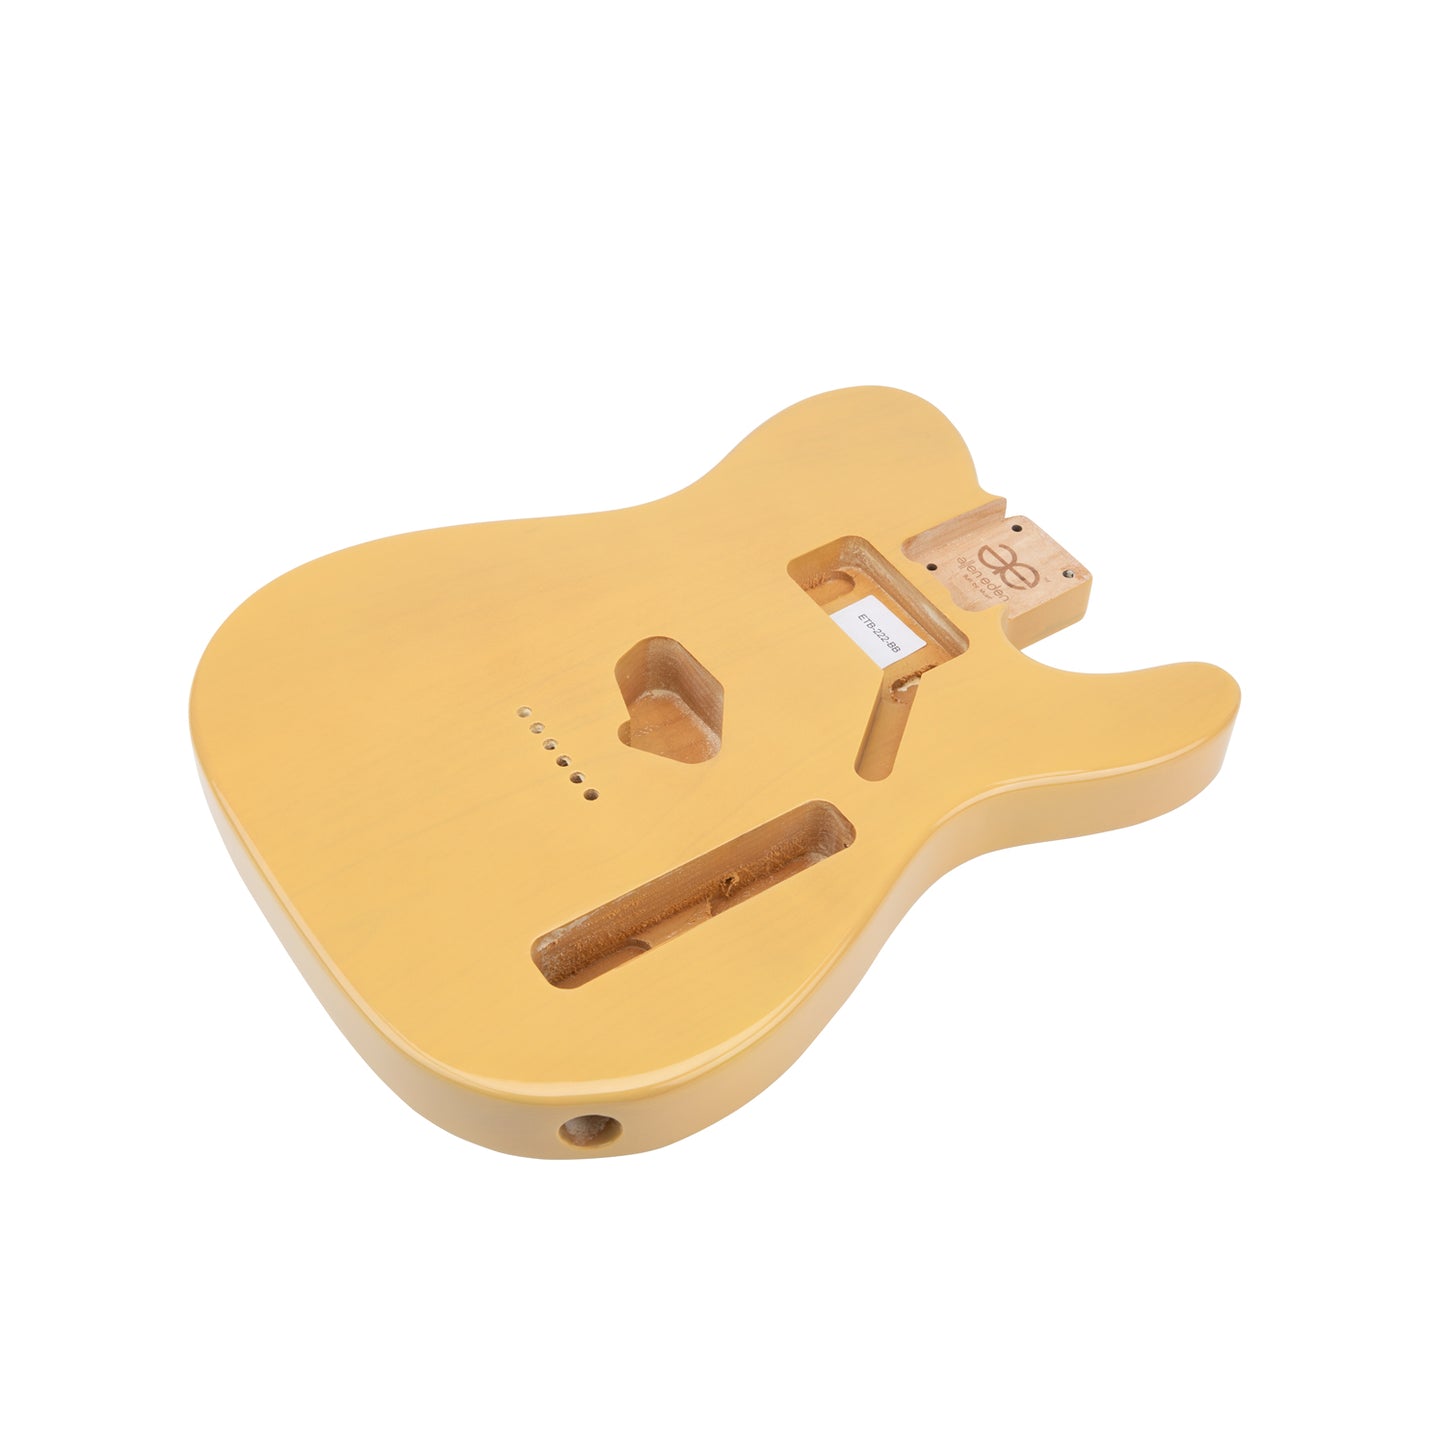 AE Guitars® T-Style Alder Replacement Guitar Body Butterscotch Blonde